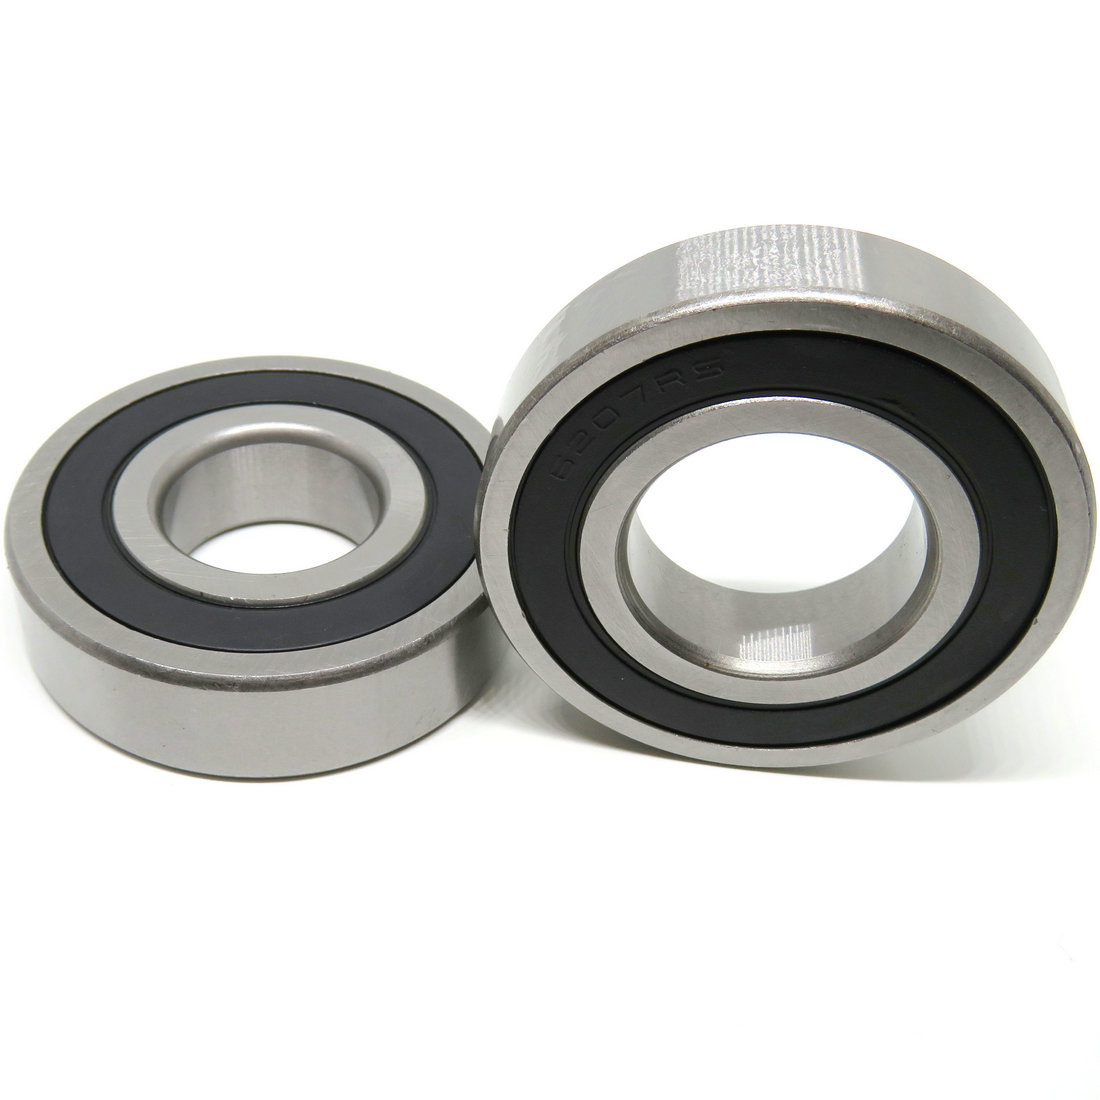 6008 Deep Groove Ball Bearings 40mm Bore 68mm OD 15mm Thick C3 Chrome Steel Rubber Seal Bearing.jpg